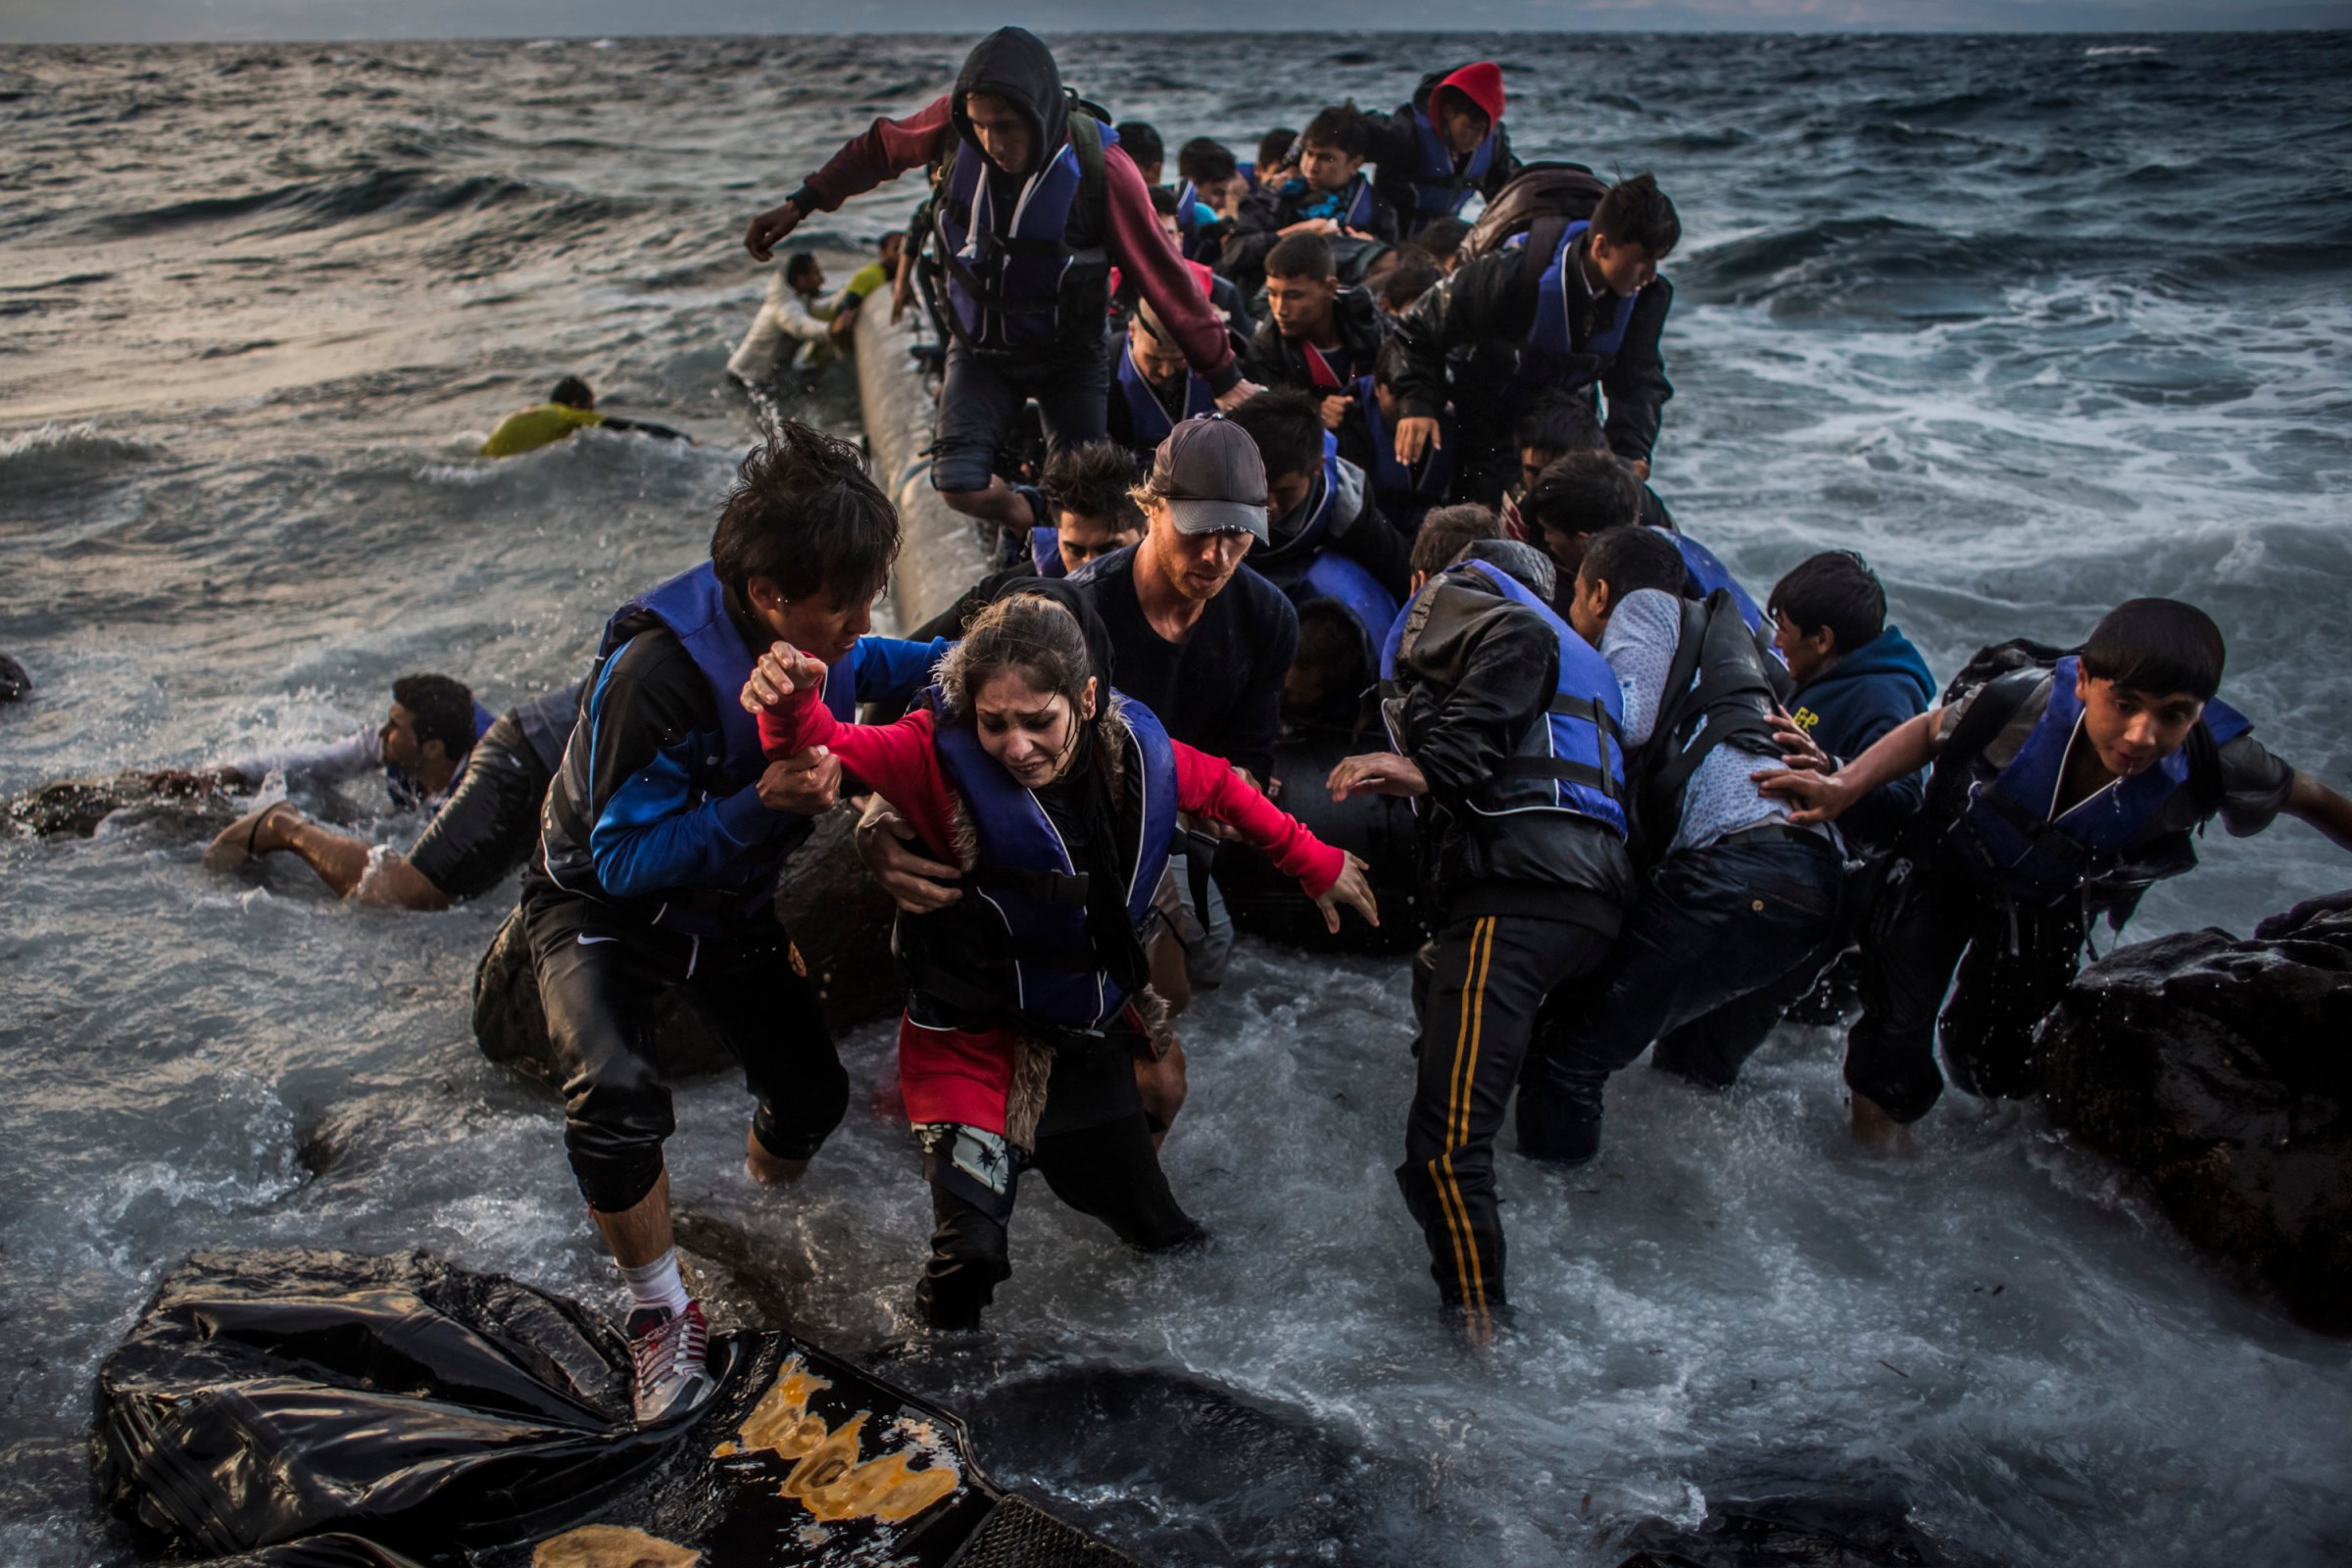 Migrants Arrive On The Beaches Of Lesbos Having Made The Crossing From Turkey